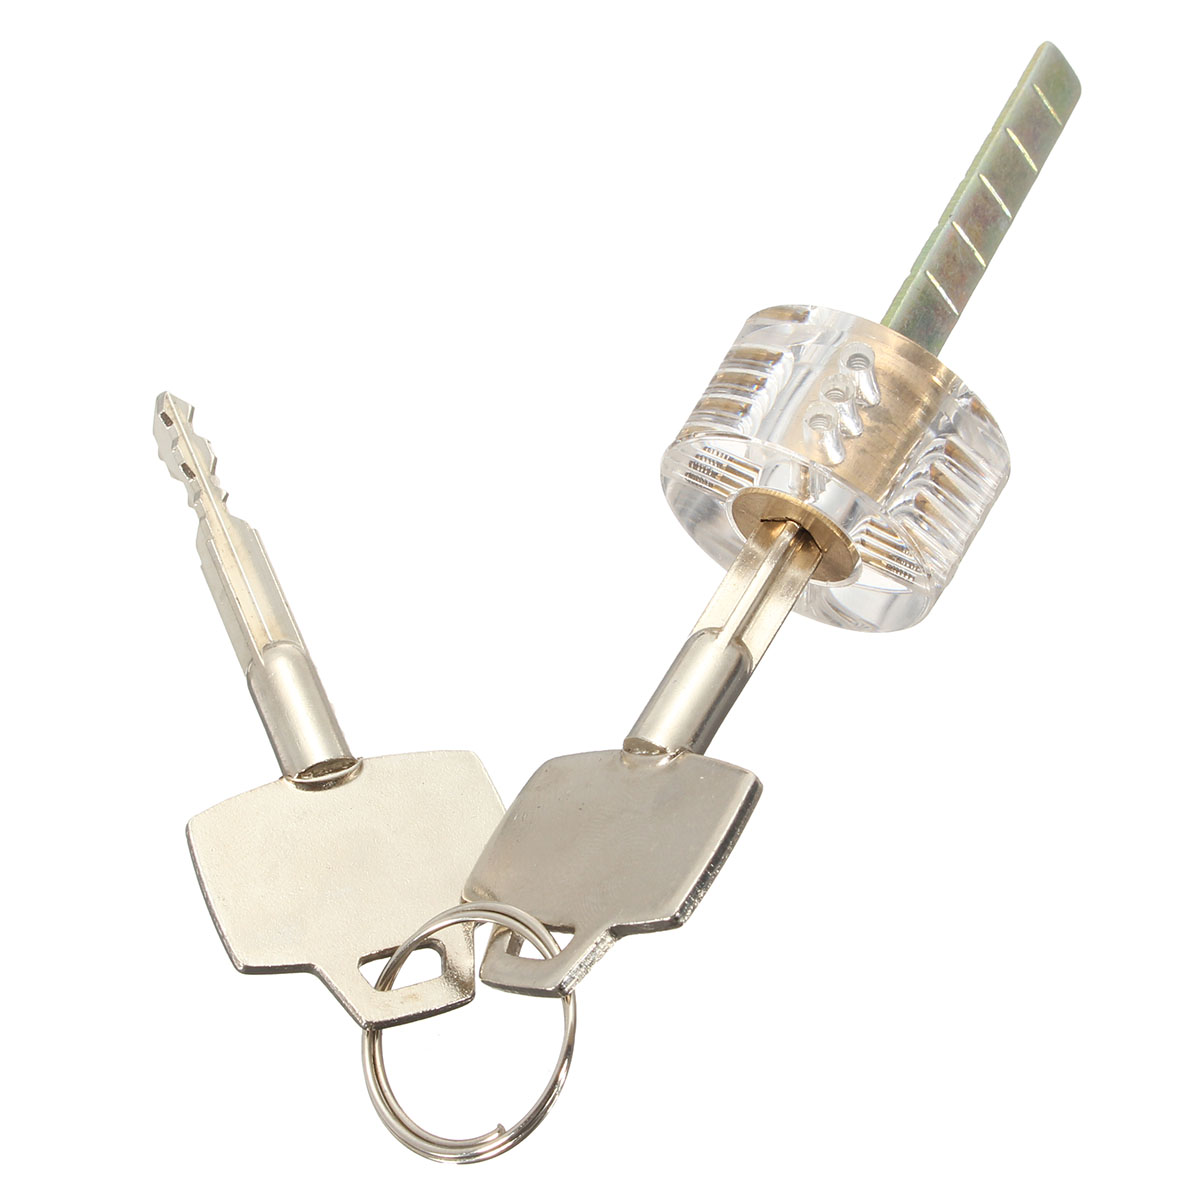 Find 6 2x2 8cm Transparent Metal Locksmith Transparent Practice Cross Lock for Sale on Gipsybee.com with cryptocurrencies